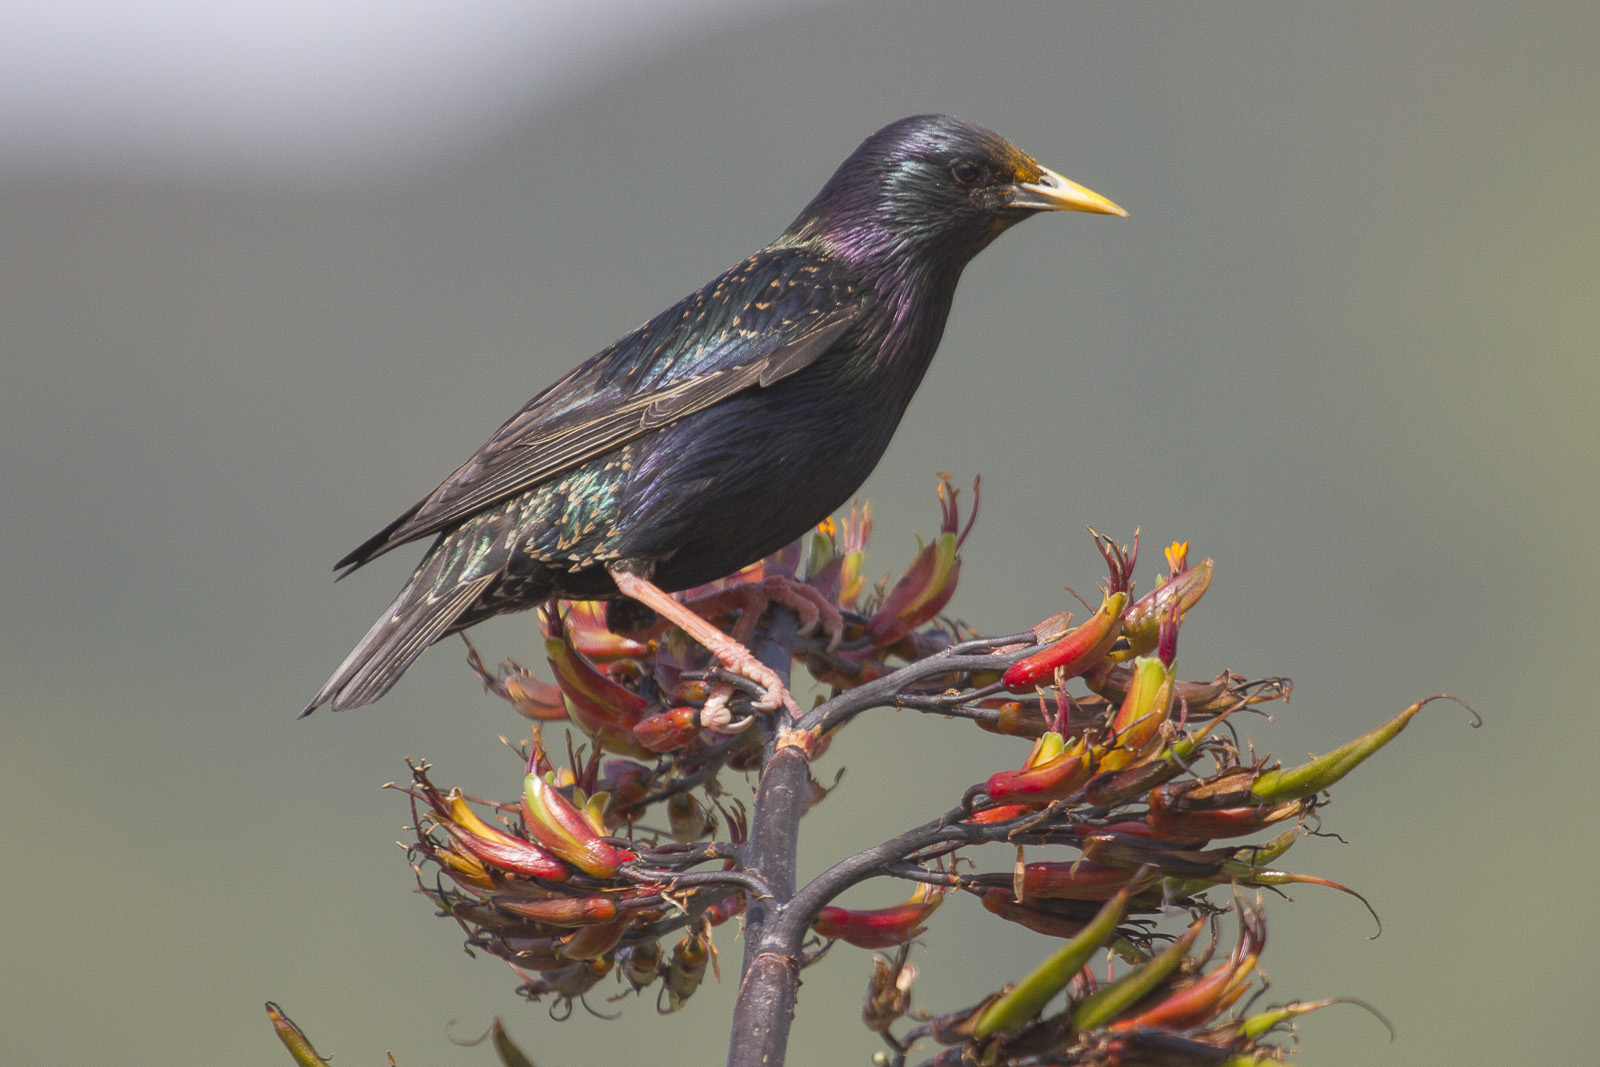 Starling on flax